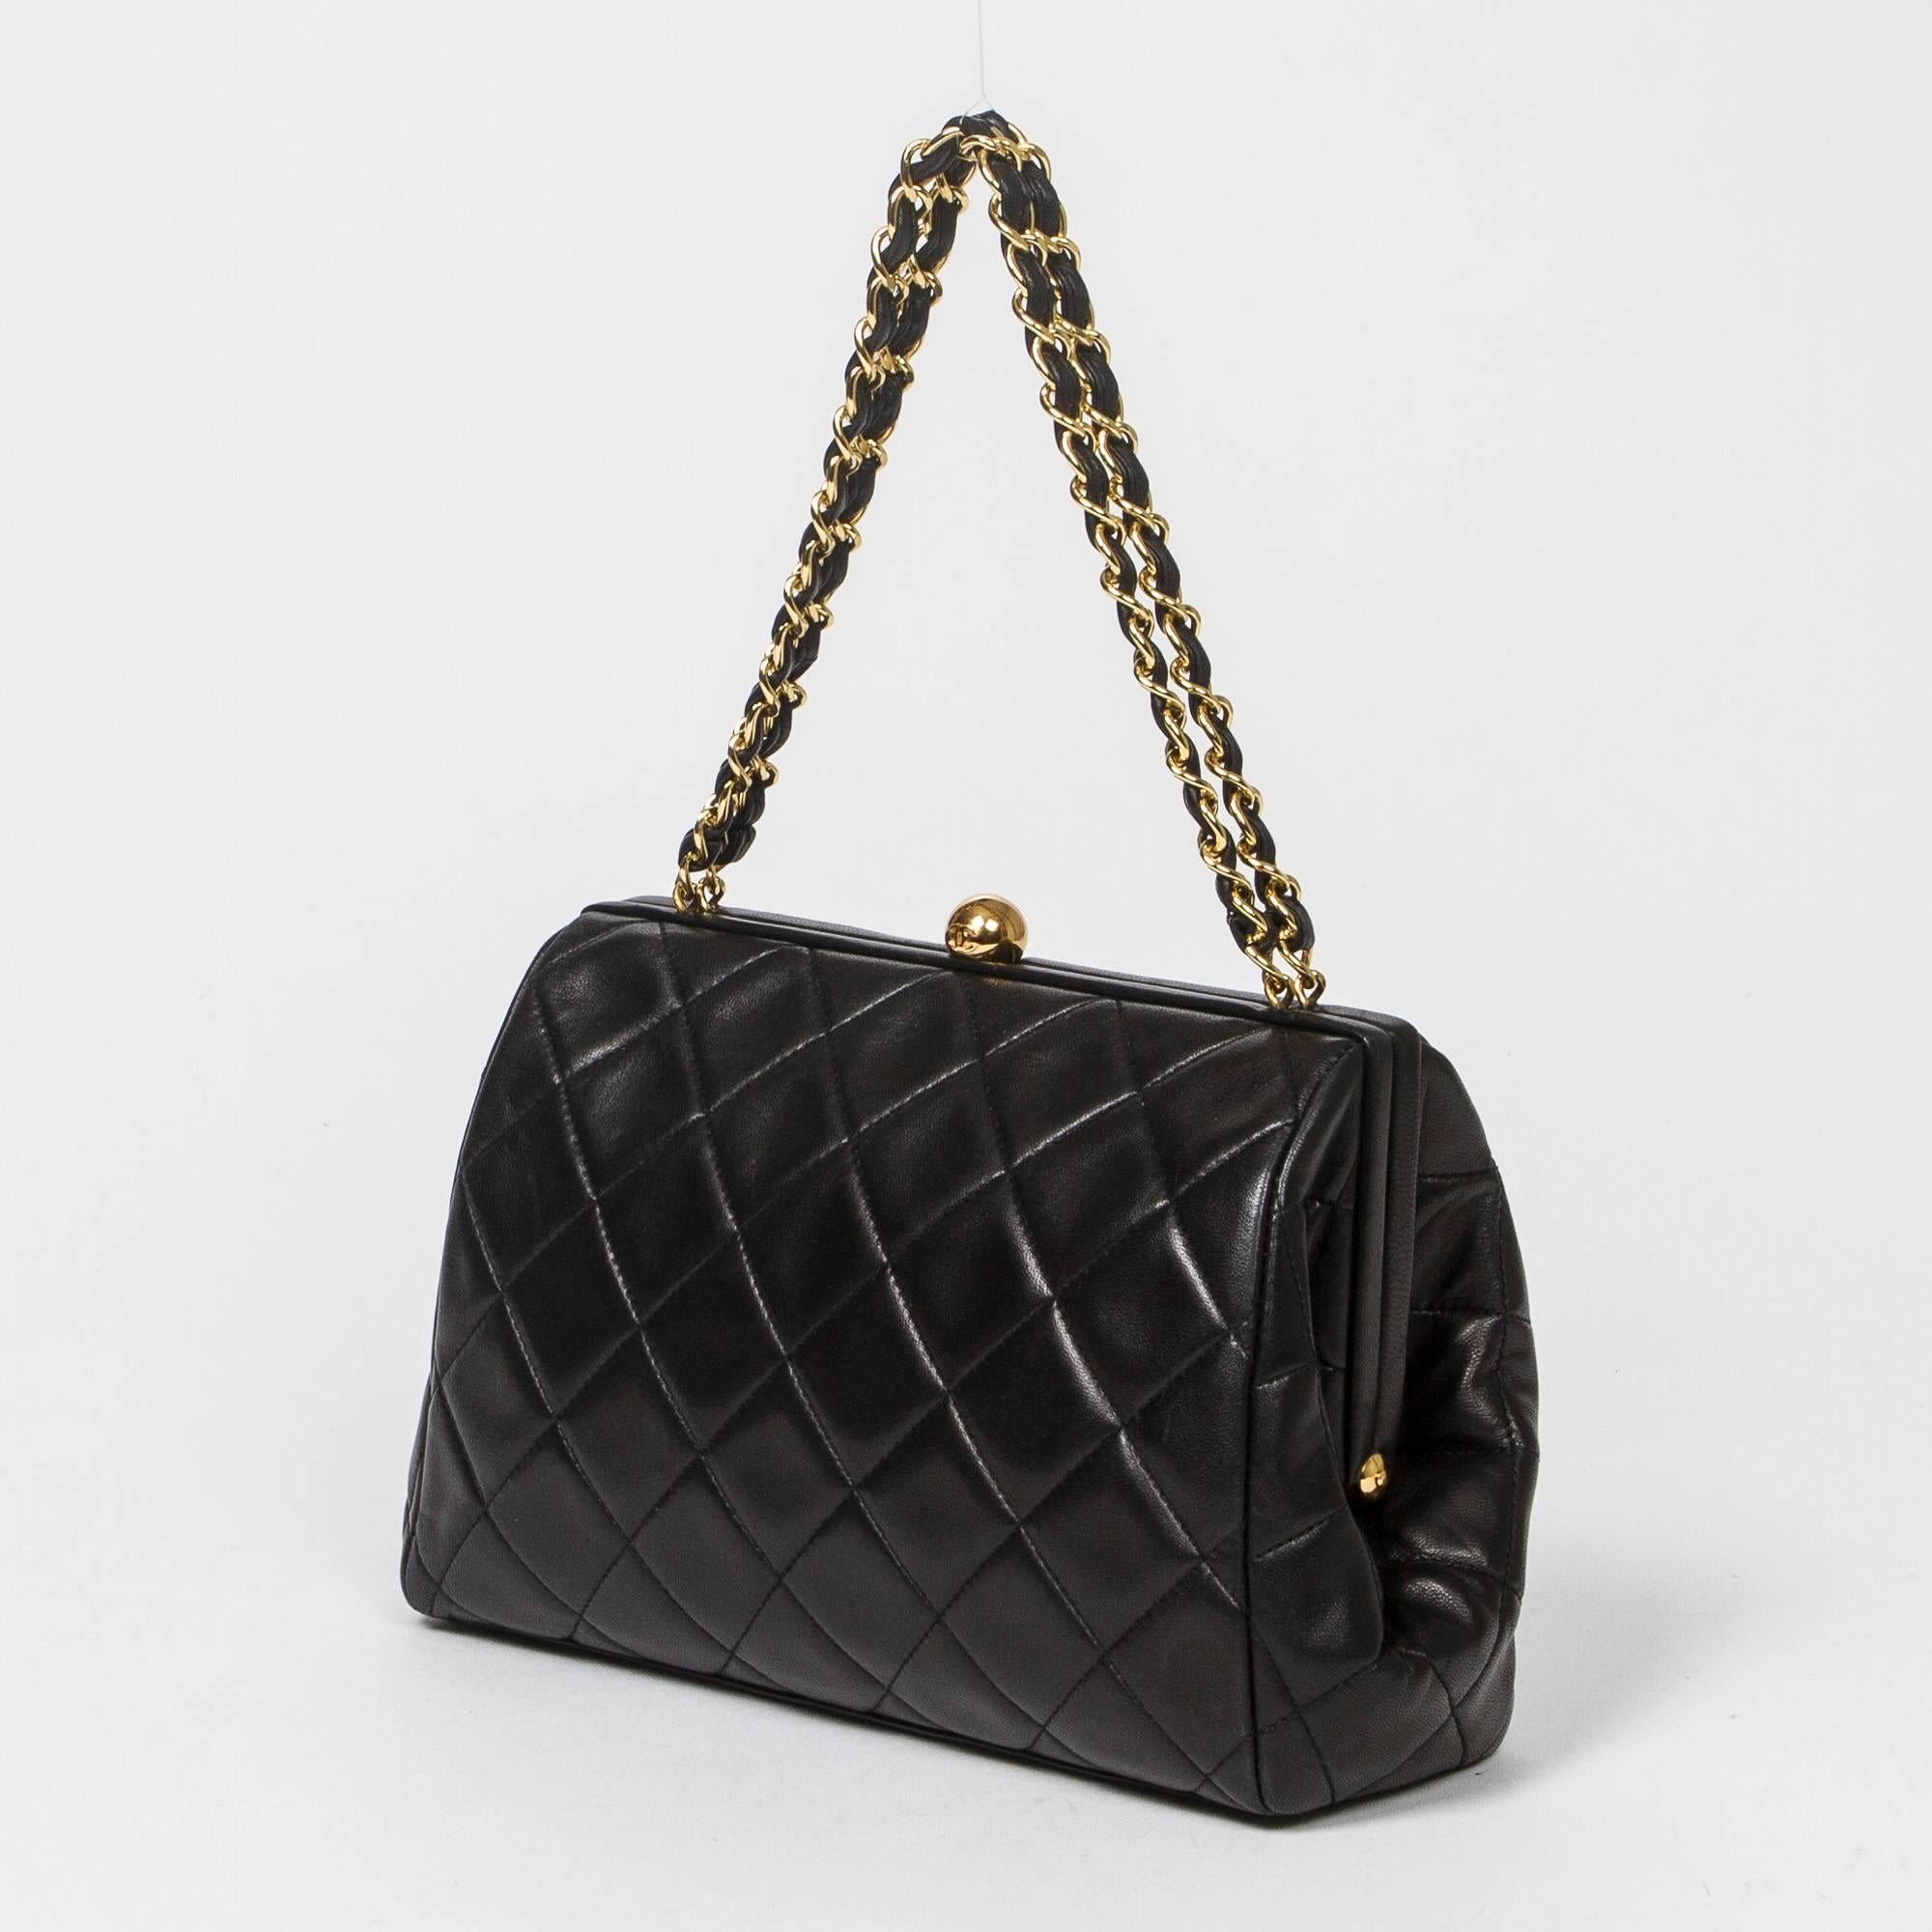 Vintage handbag in black quilted leather with gold tone chain strap interlaced with black leather. Kiss closure. Black leather interior with one zip pocket and a slip pocket. Heat gold stamp 